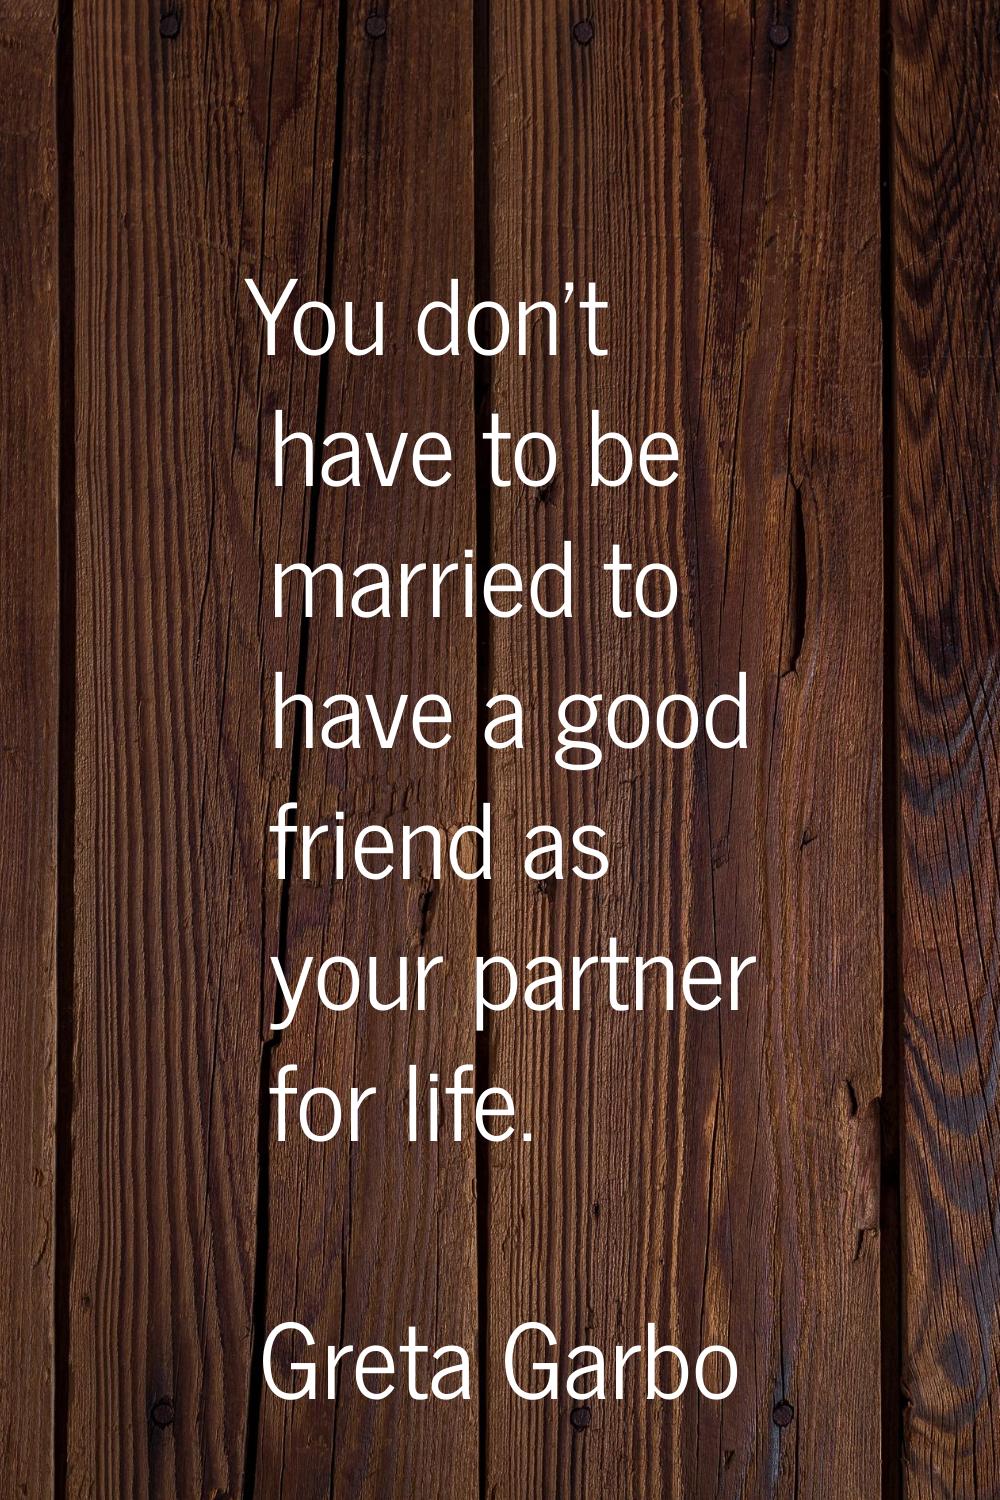 You don't have to be married to have a good friend as your partner for life.